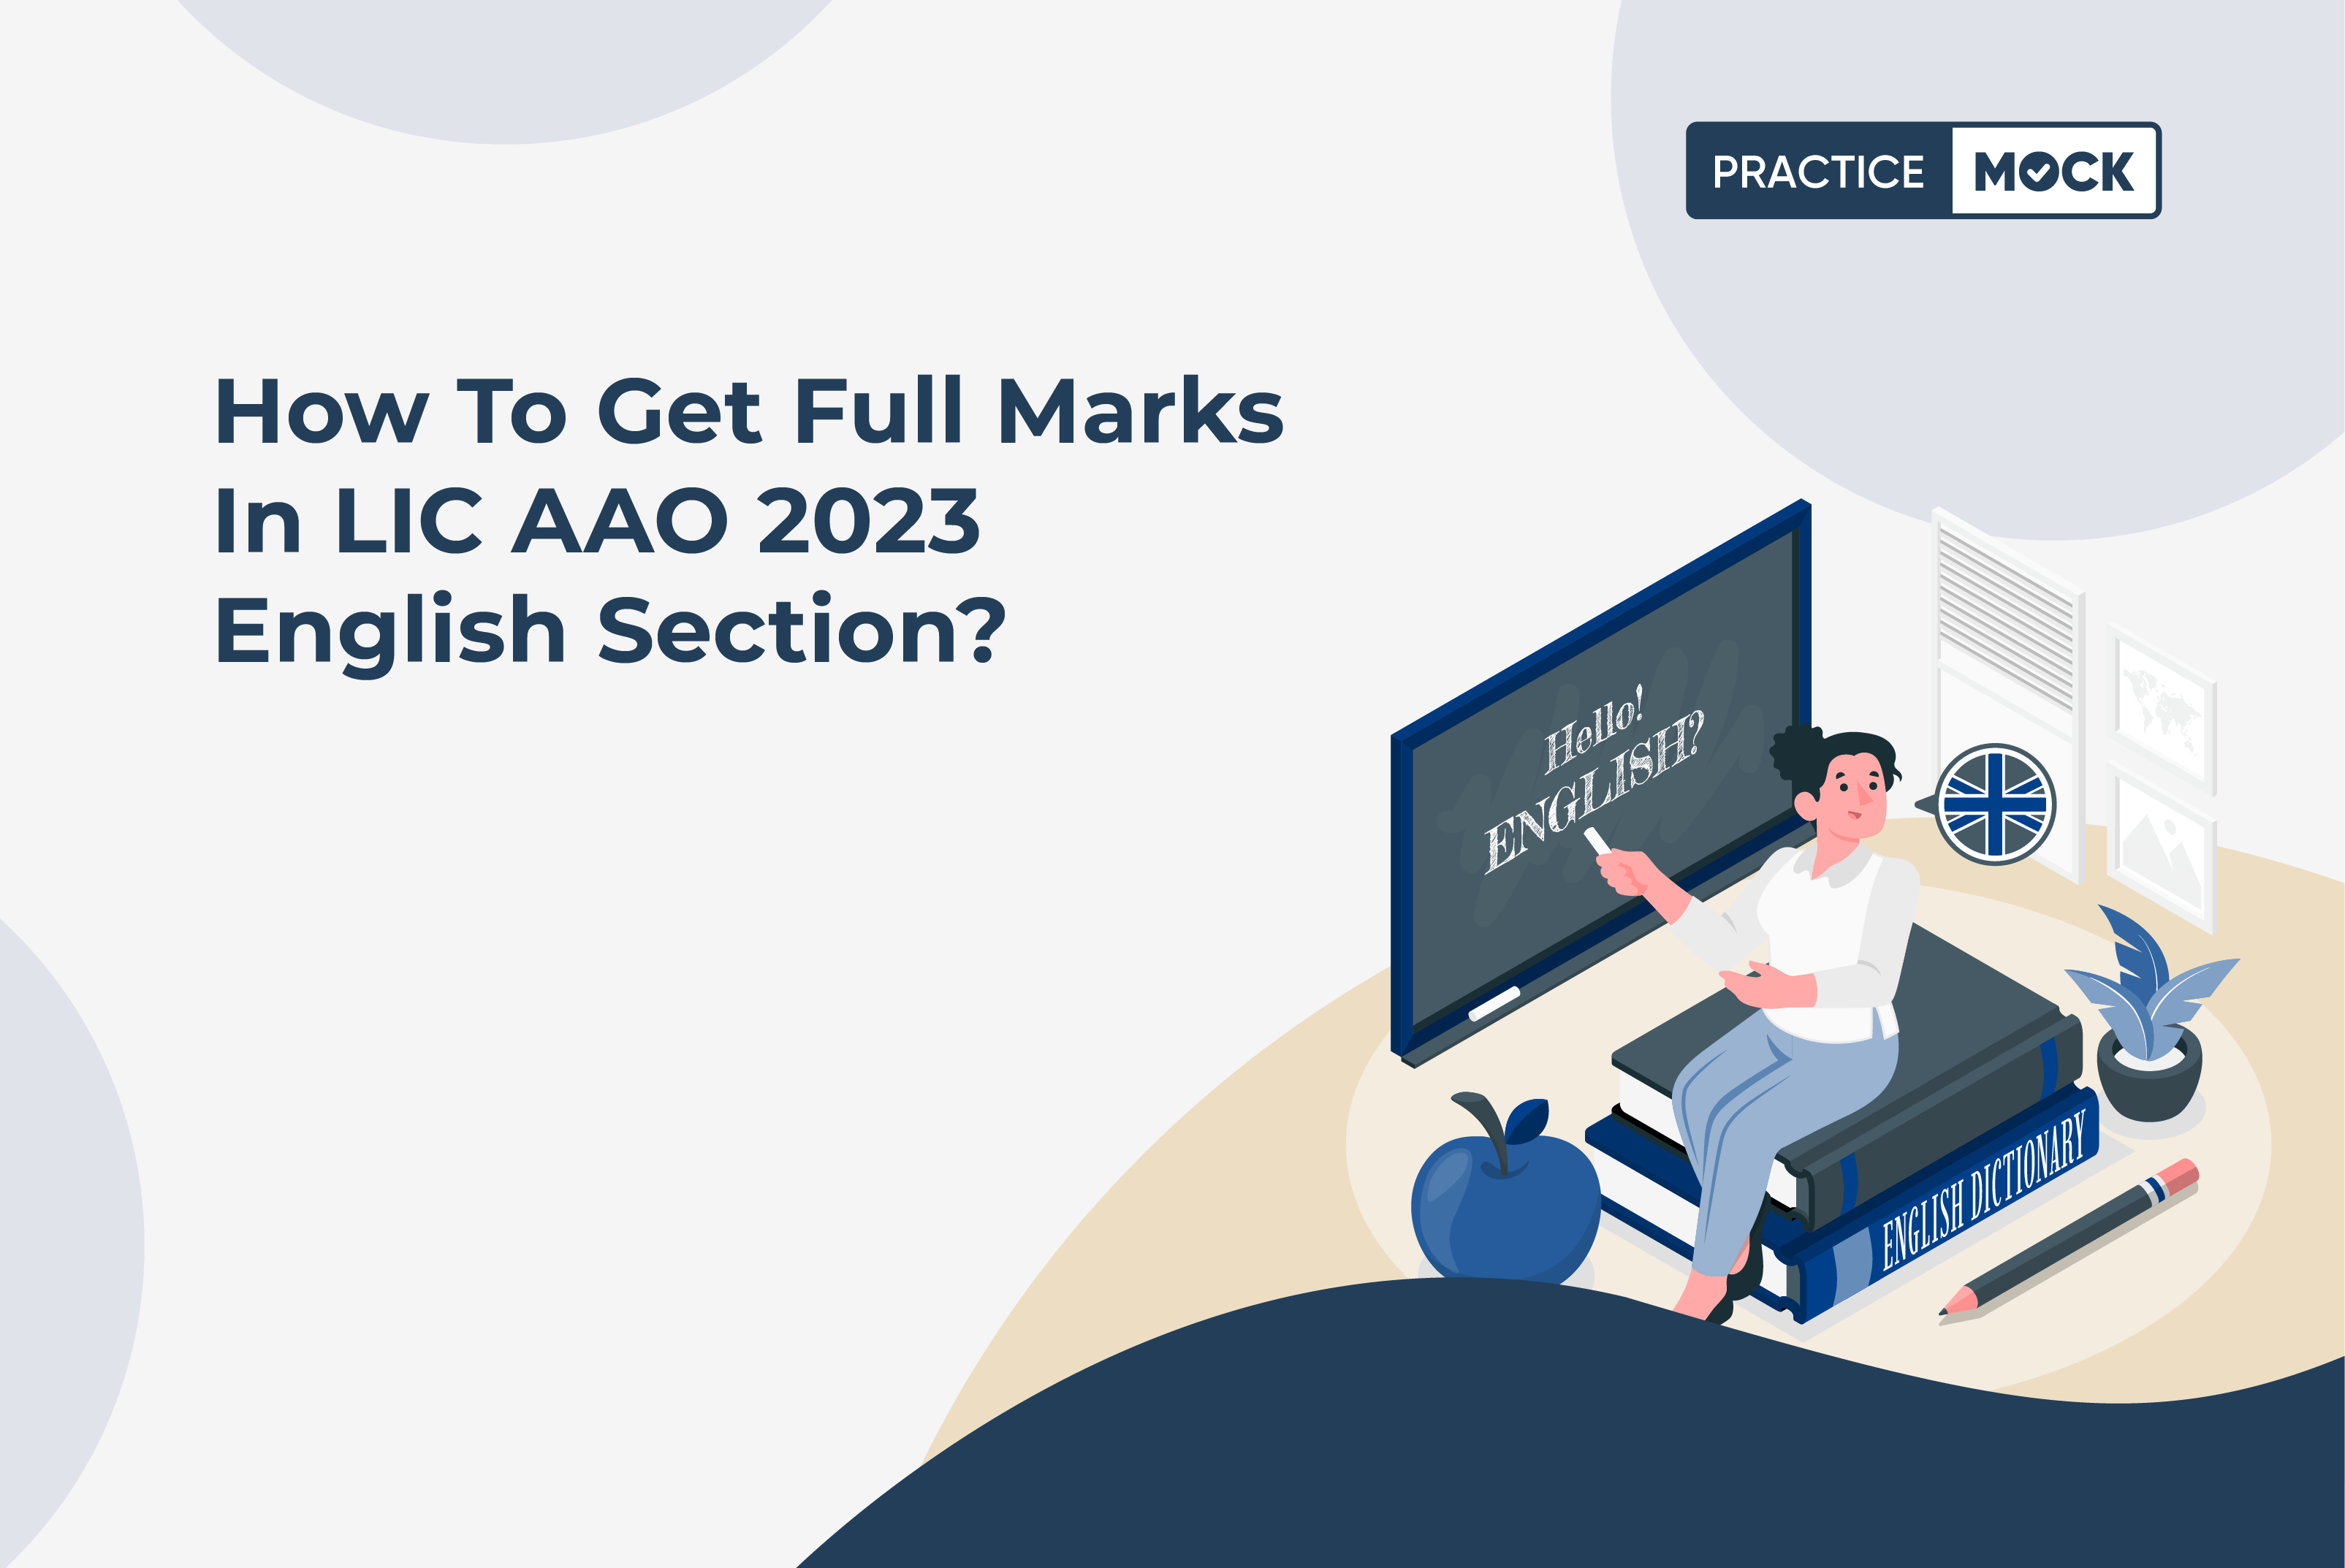 How to get full marks in LIC AAO 2023 English Section?